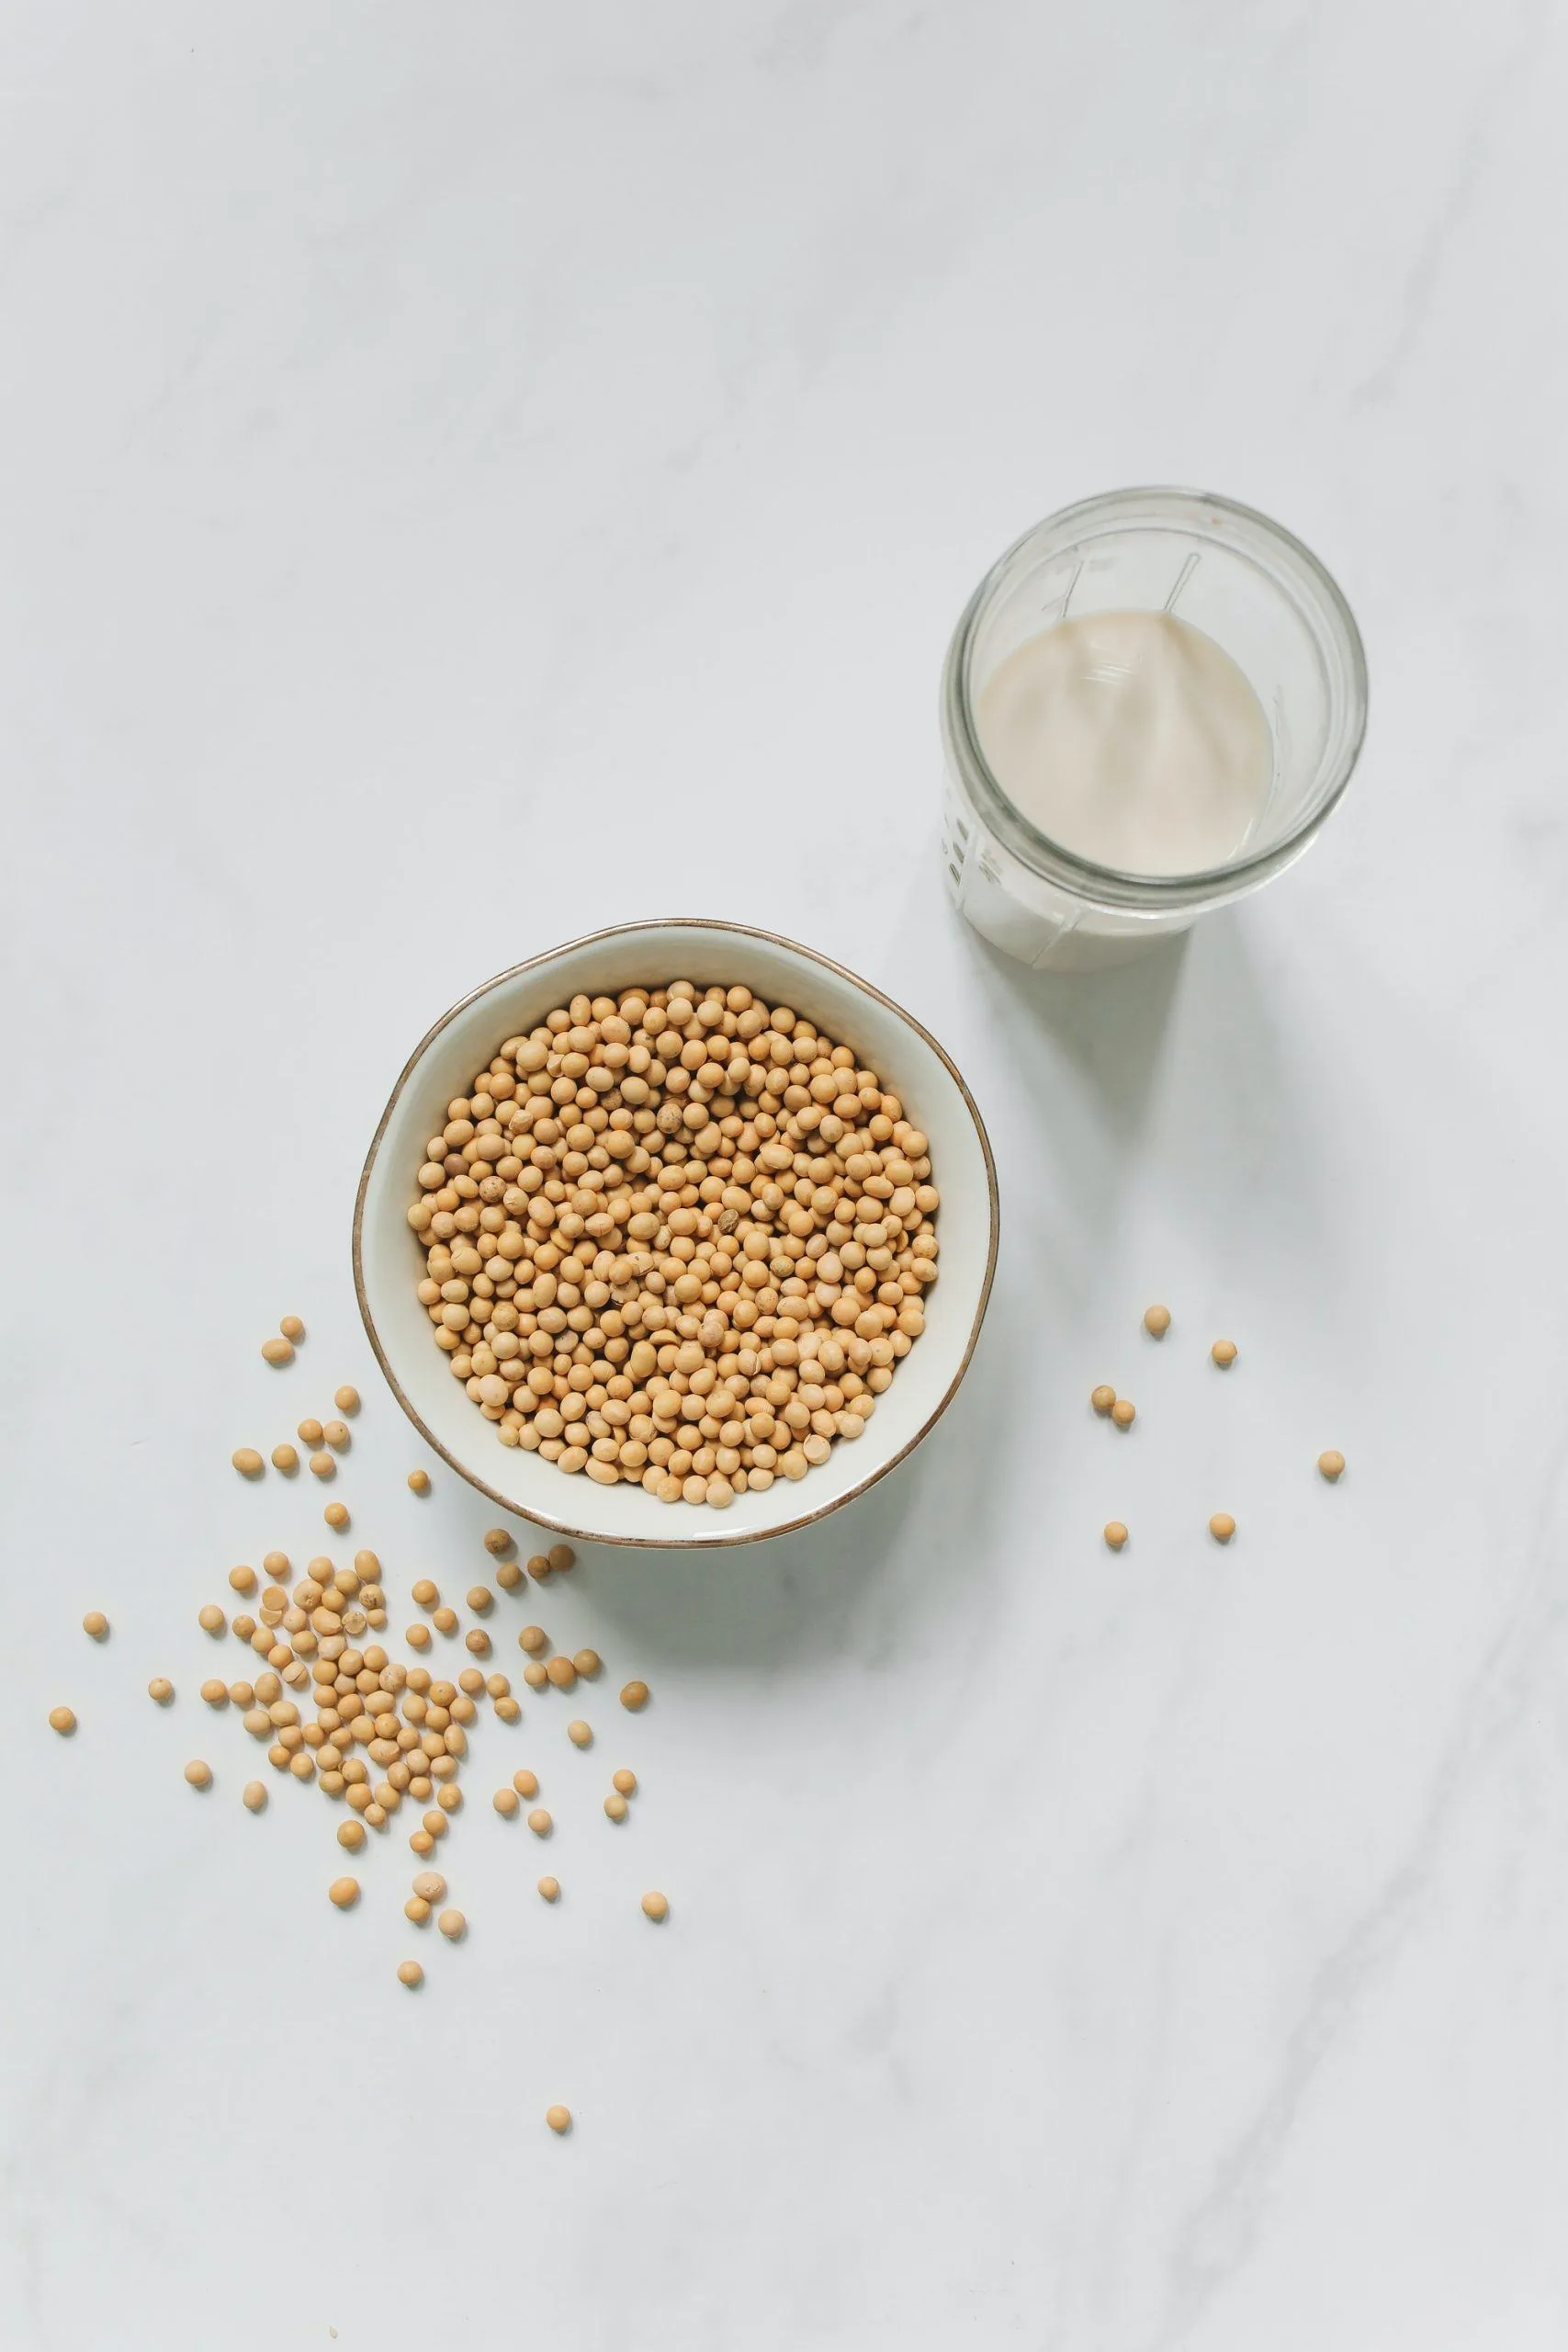 Soy Isn’t The Problem, The Processing Is